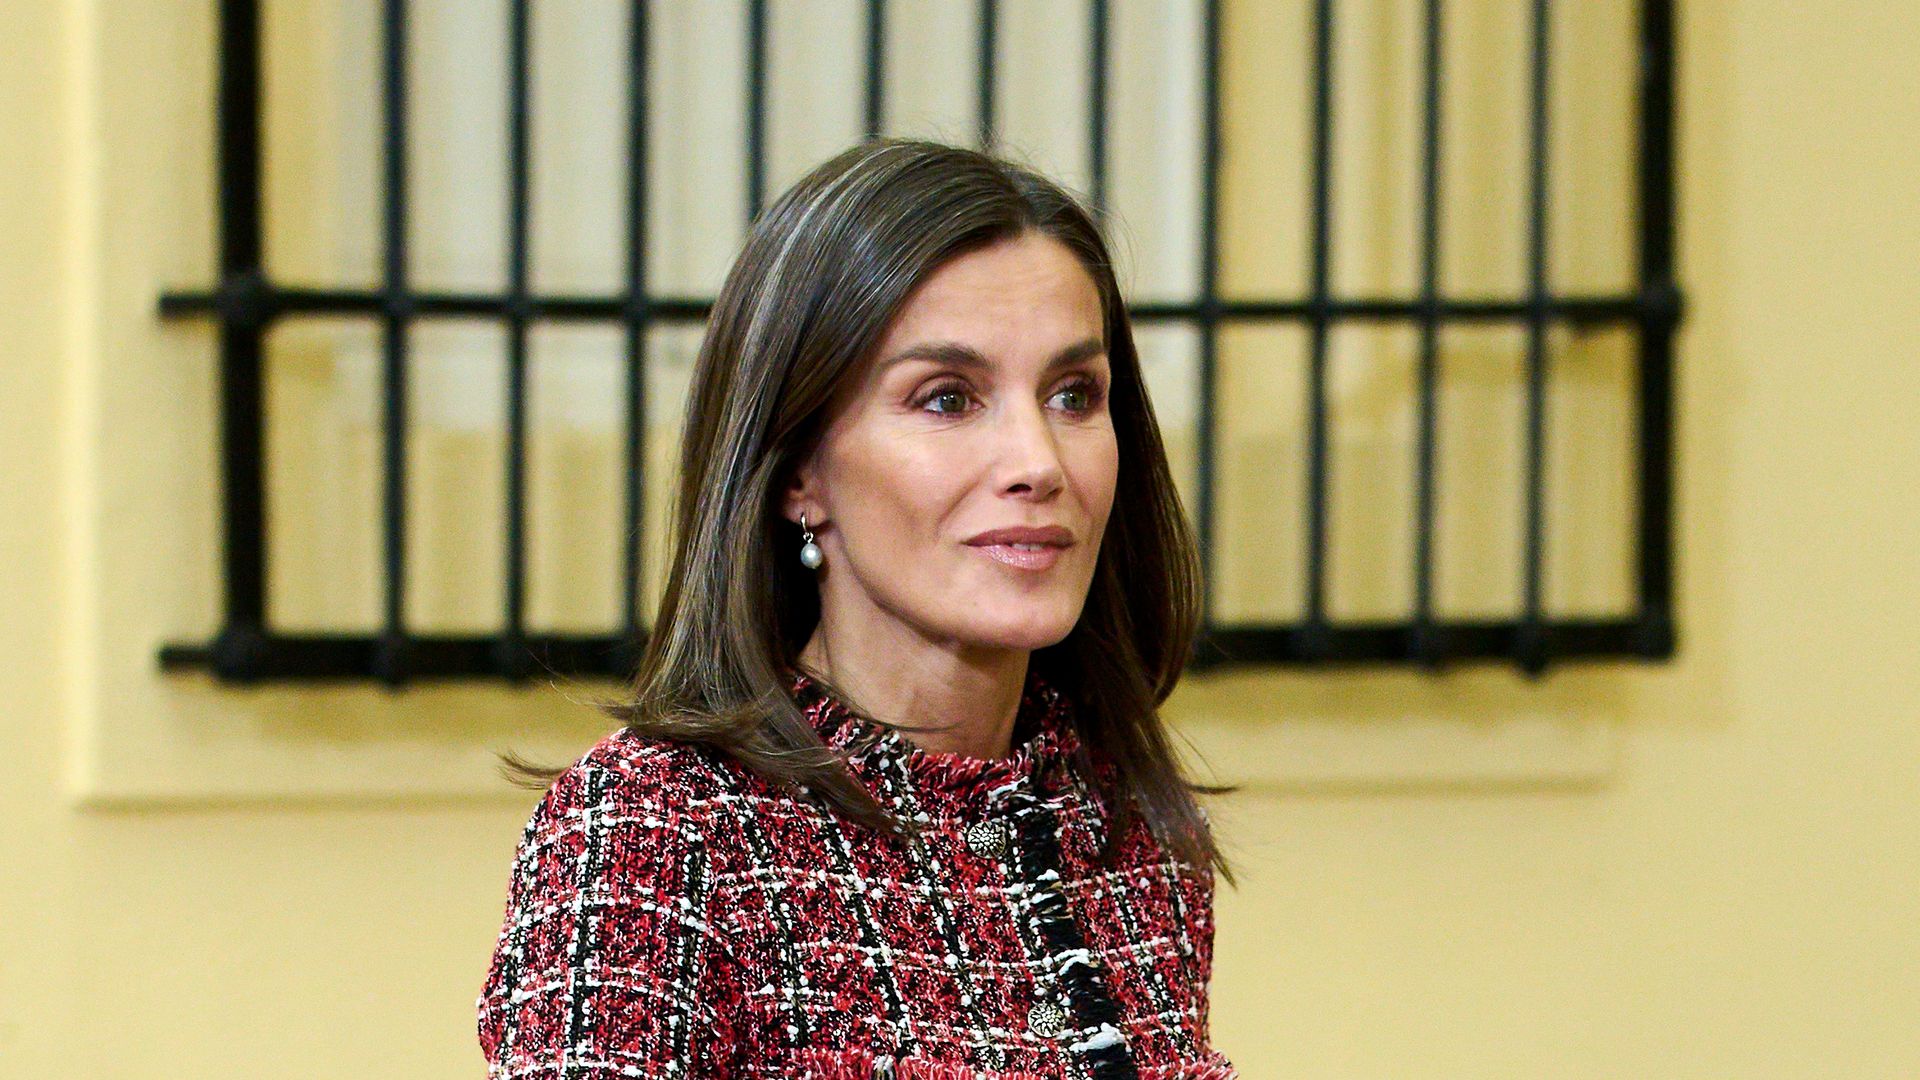 Queen Letizia is the ultimate cool-girl in tweed jacket and affordable ballet flats